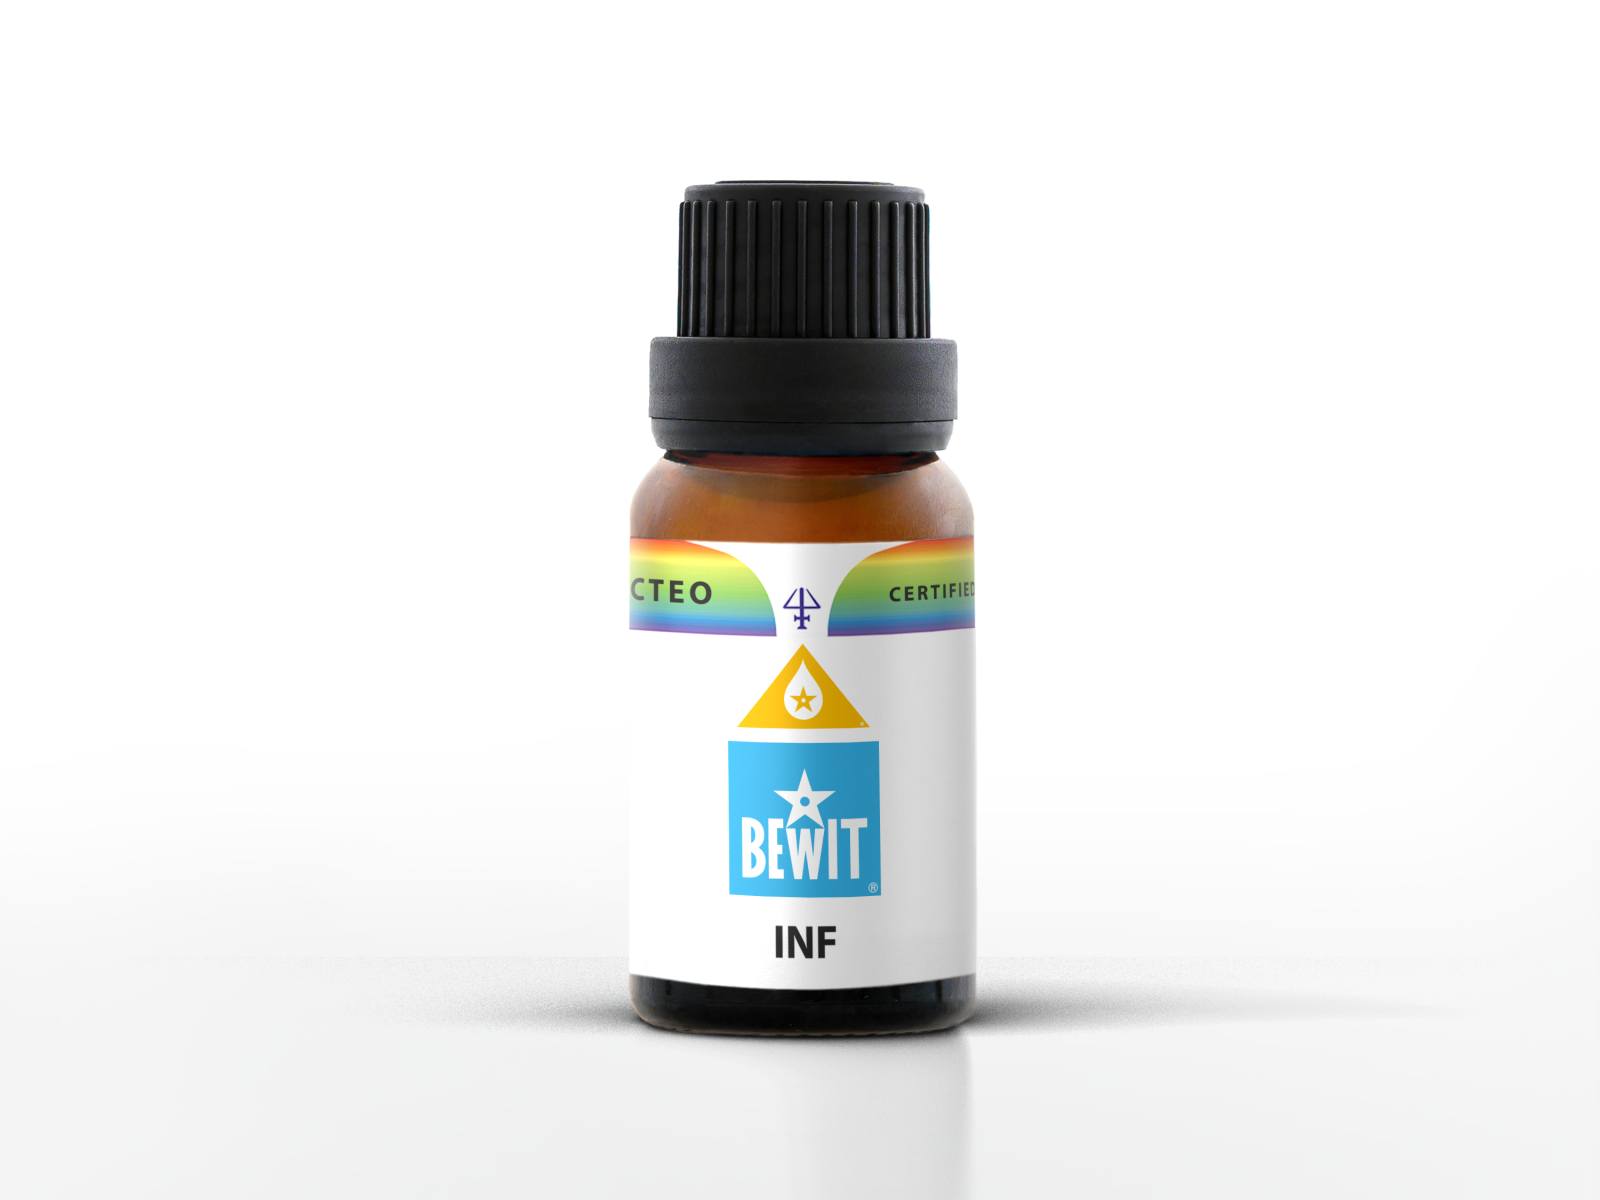 BEWIT INF - Blend of essential oils - 1